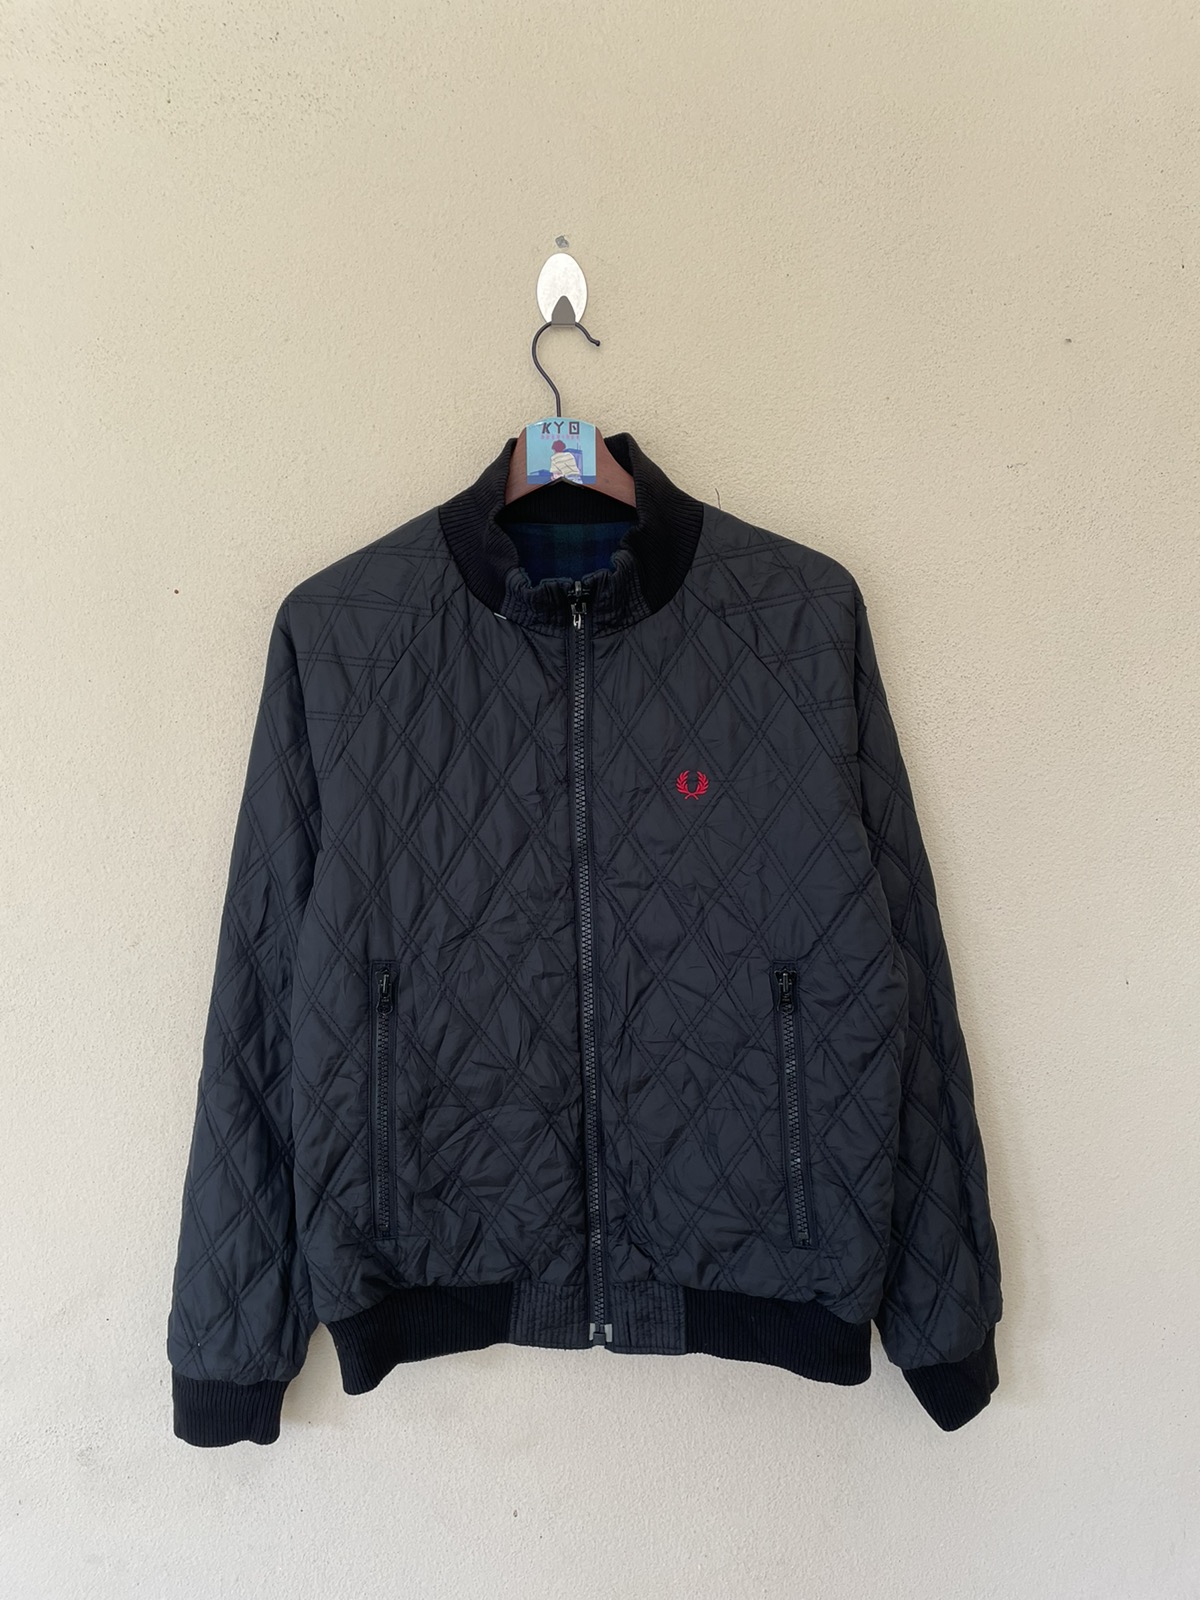 FRED PERRY REVERSIBLE JACKET - 2